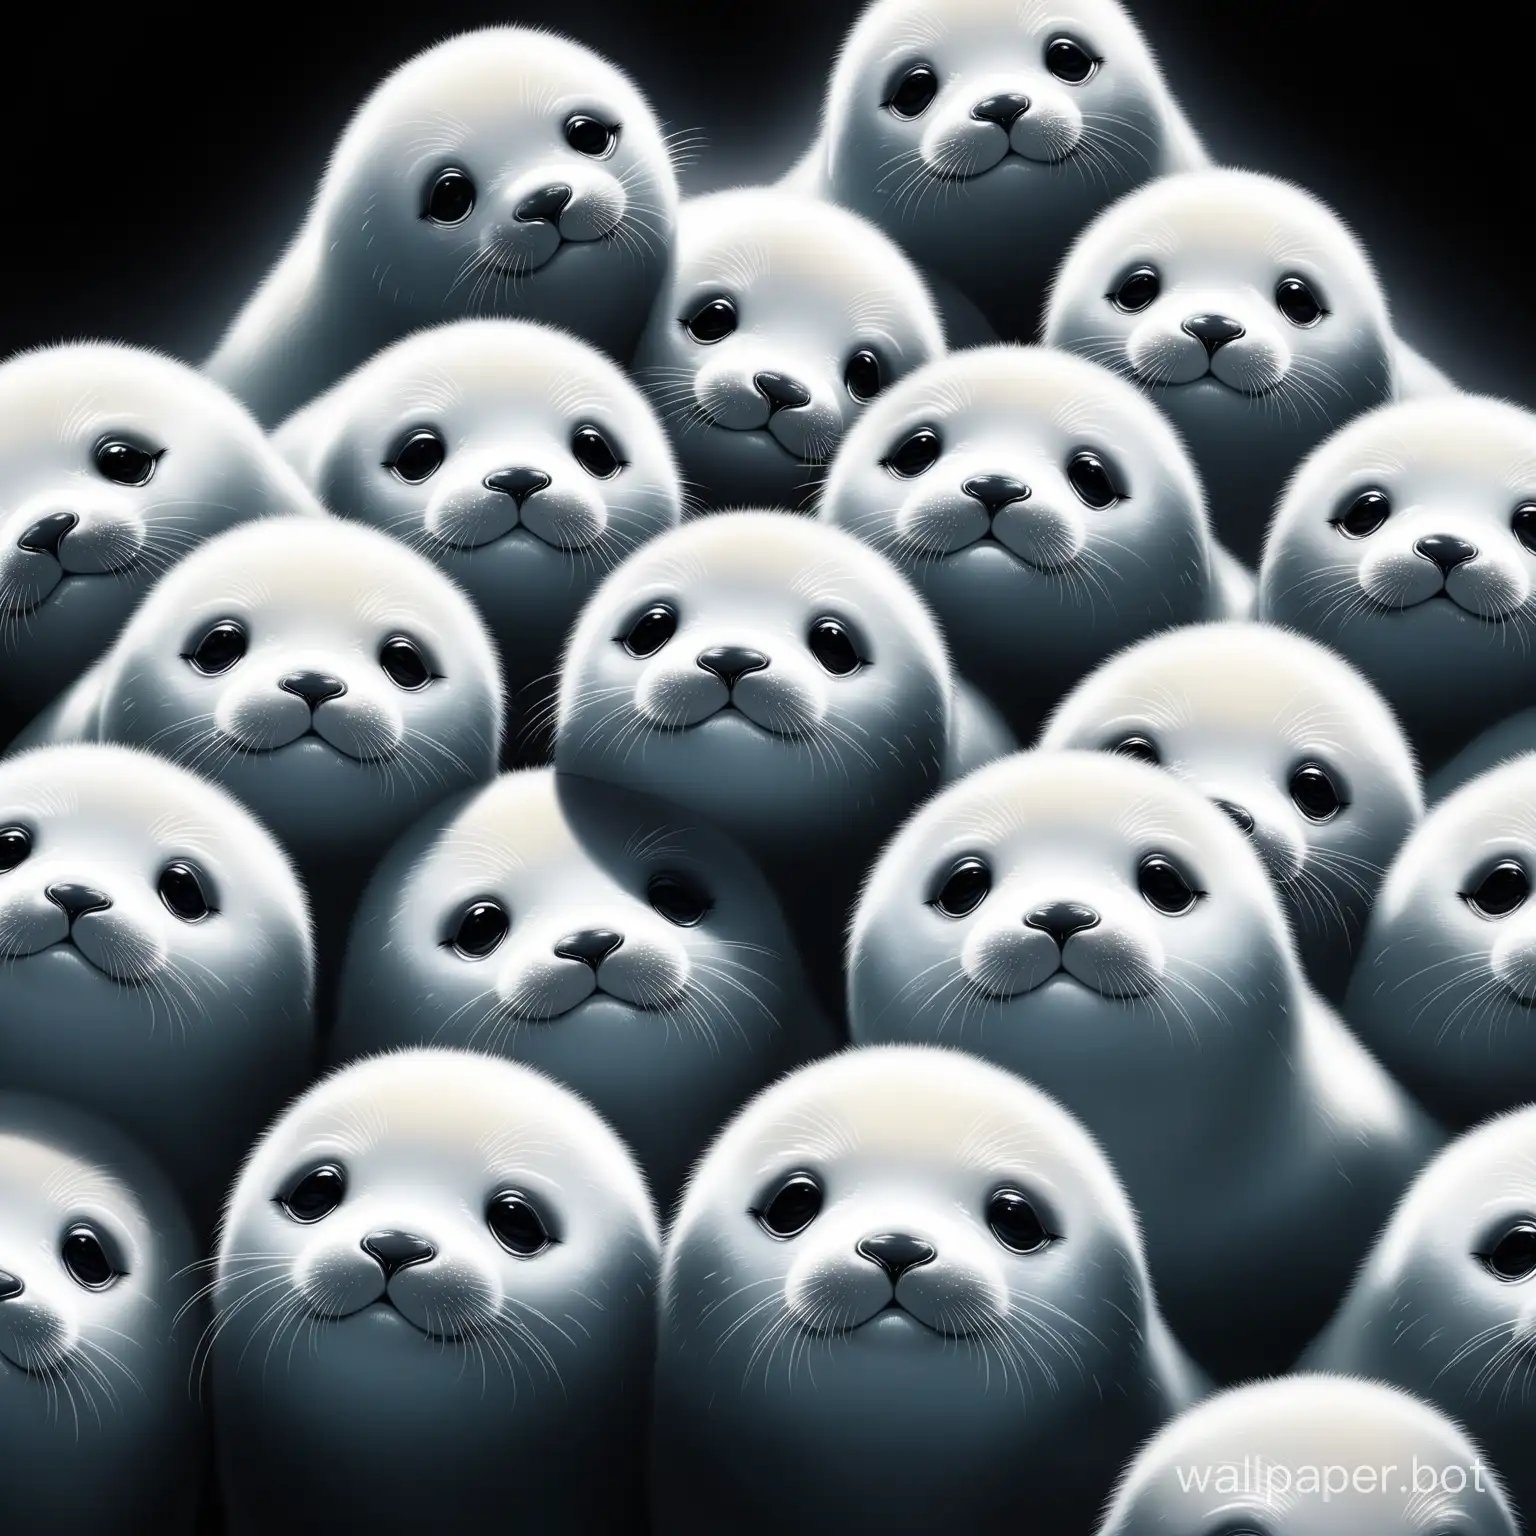 Adorable-Smiling-White-Baby-Seals-in-Enigmatic-Darkness